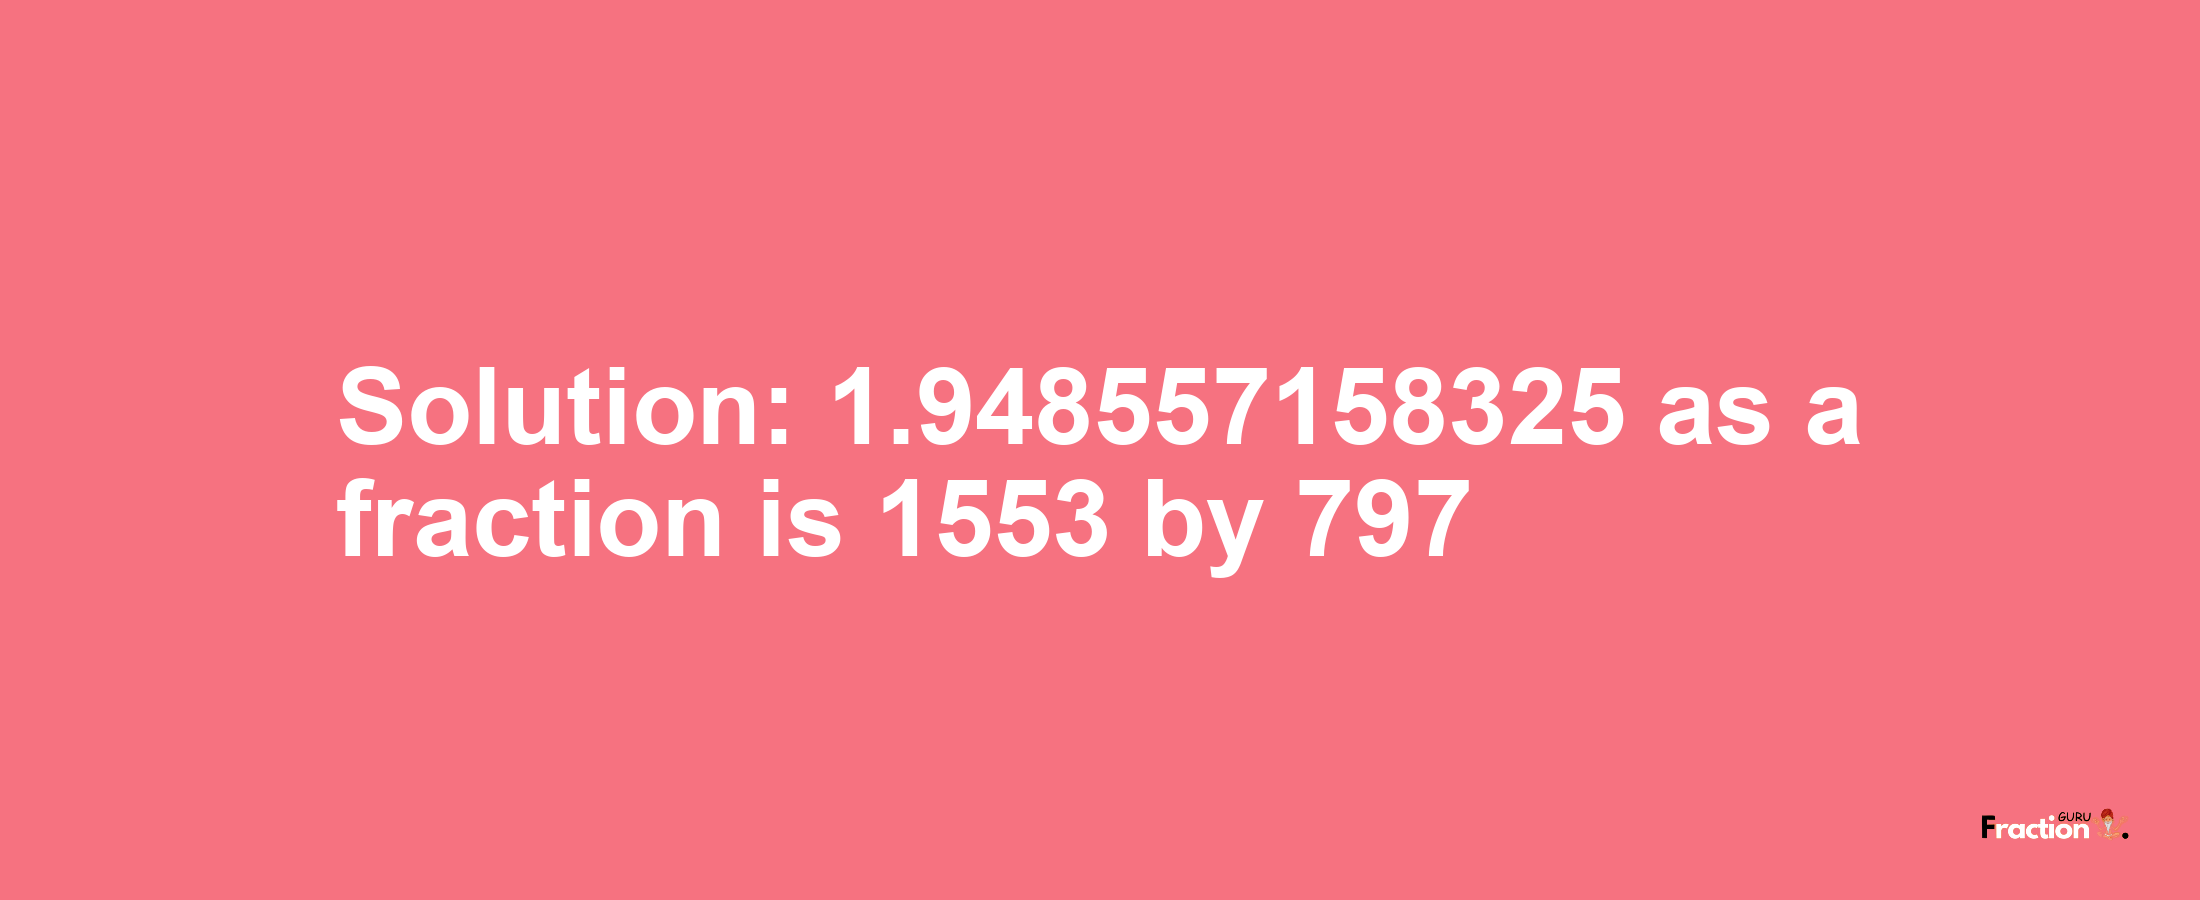 Solution:1.948557158325 as a fraction is 1553/797